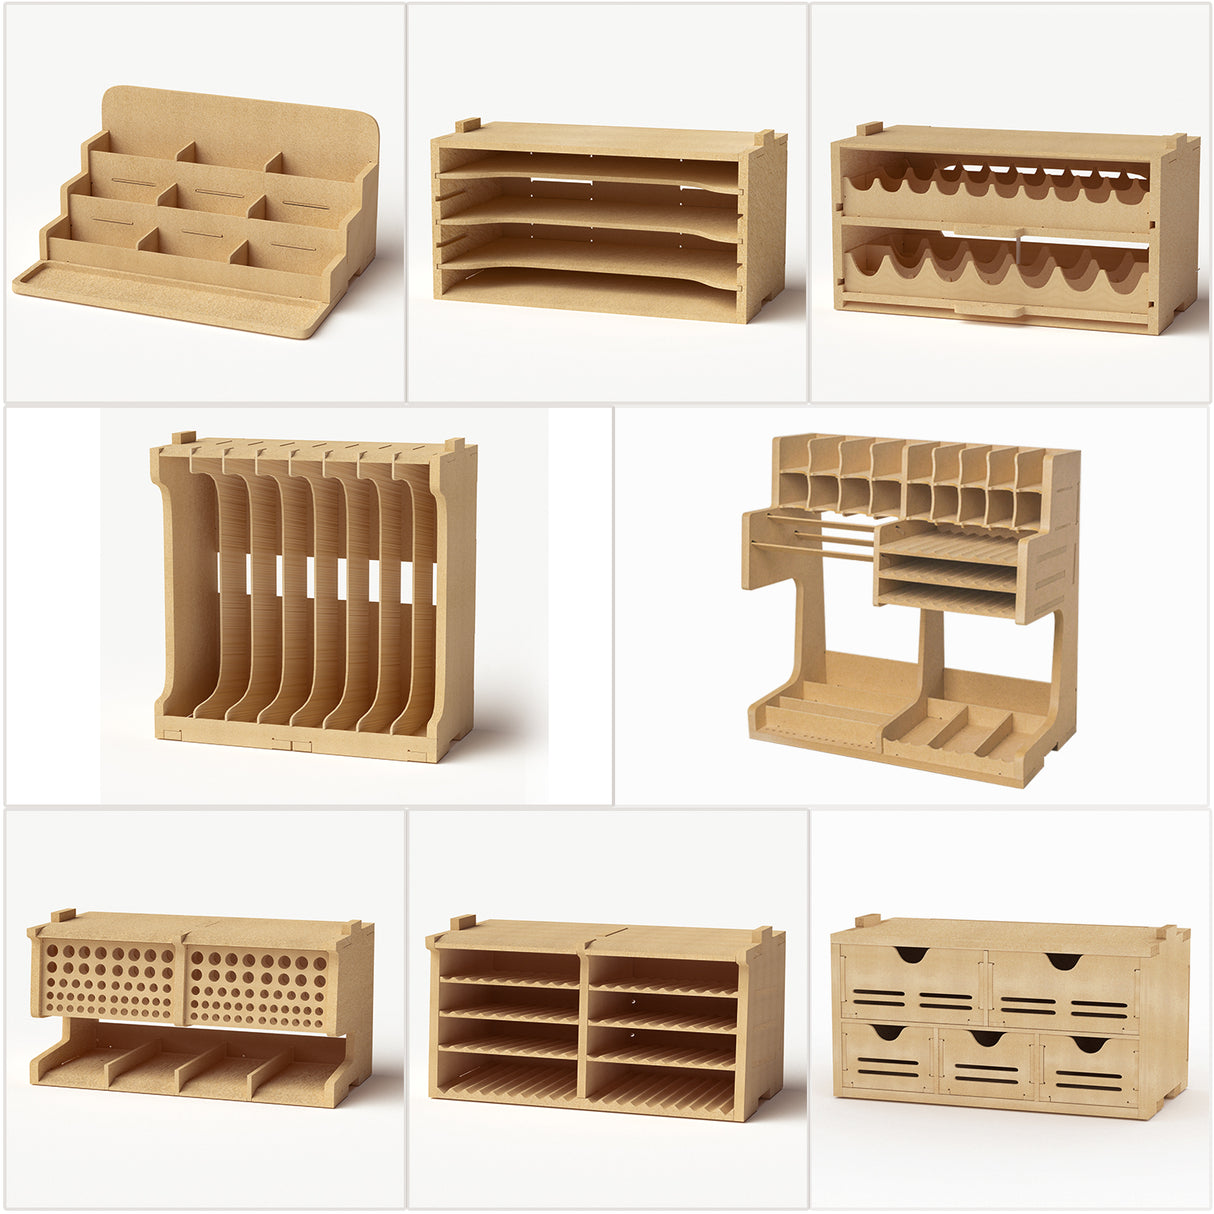 Bucasso Wooden Model Kit Organizer Rack with MDF Material, Paint Rack,  Screwdriver/Brush Holder, For Tamiya Paints and Tools, GK1